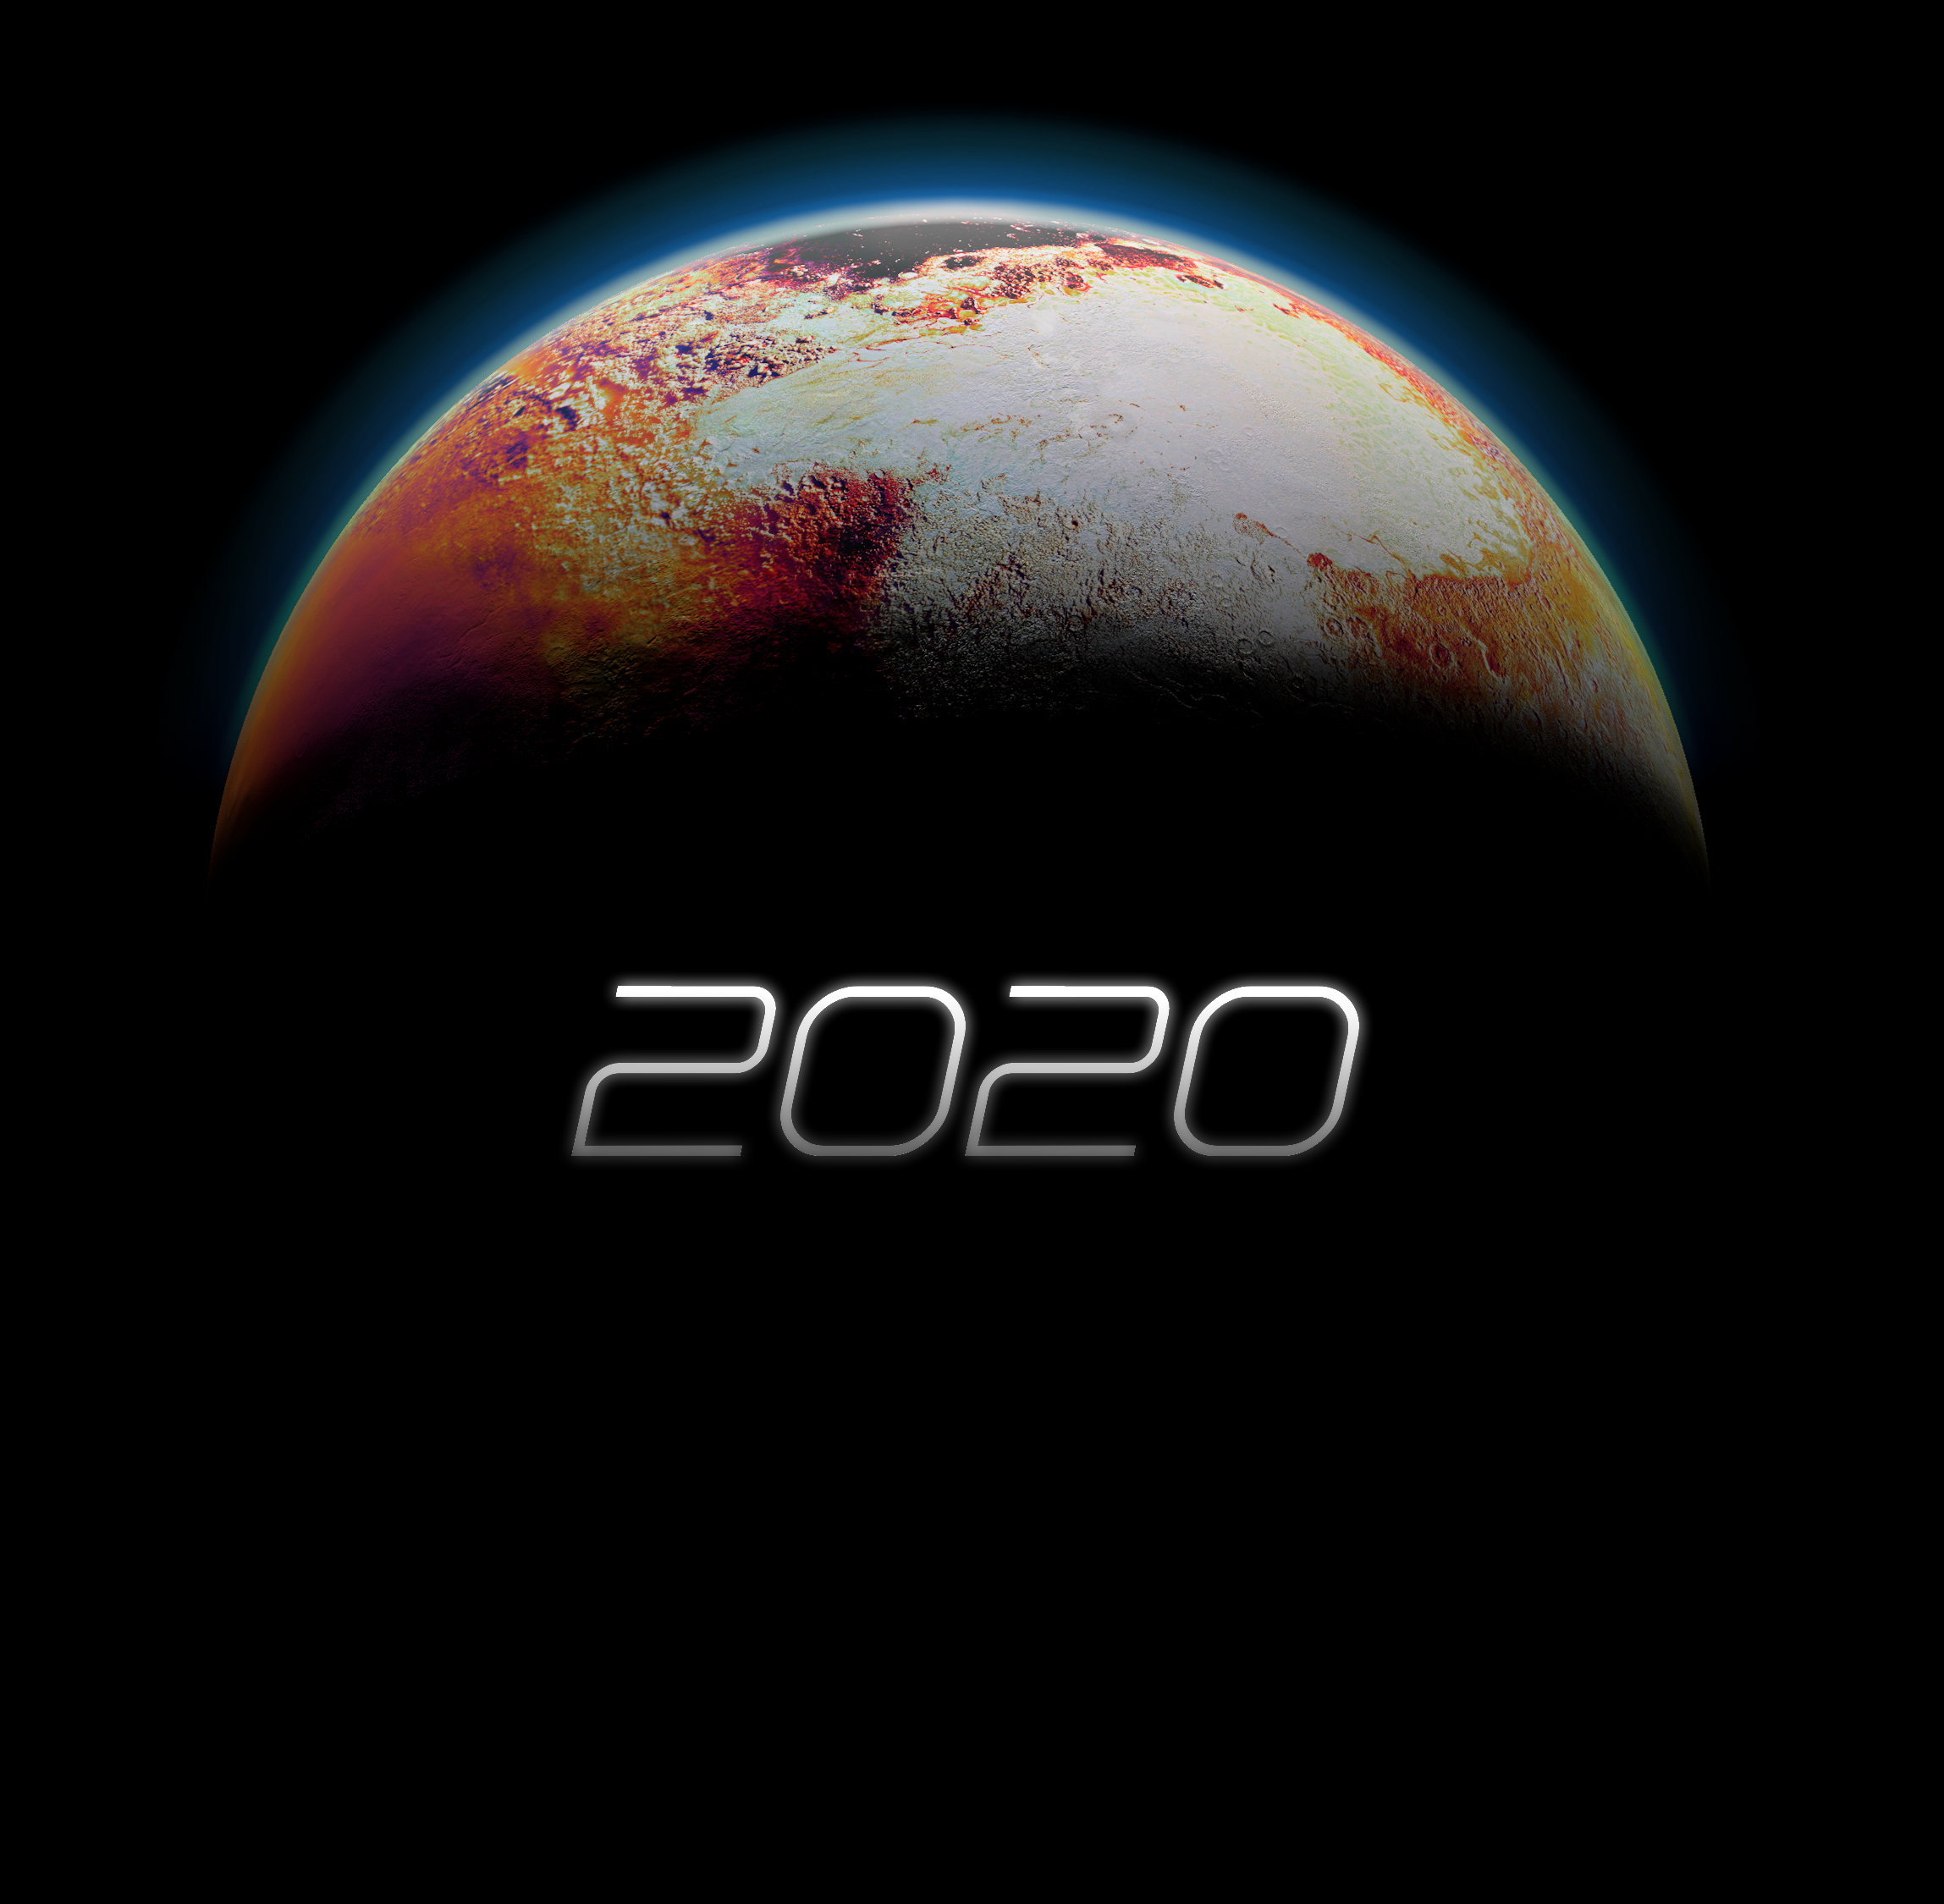 2020 on pluto.png